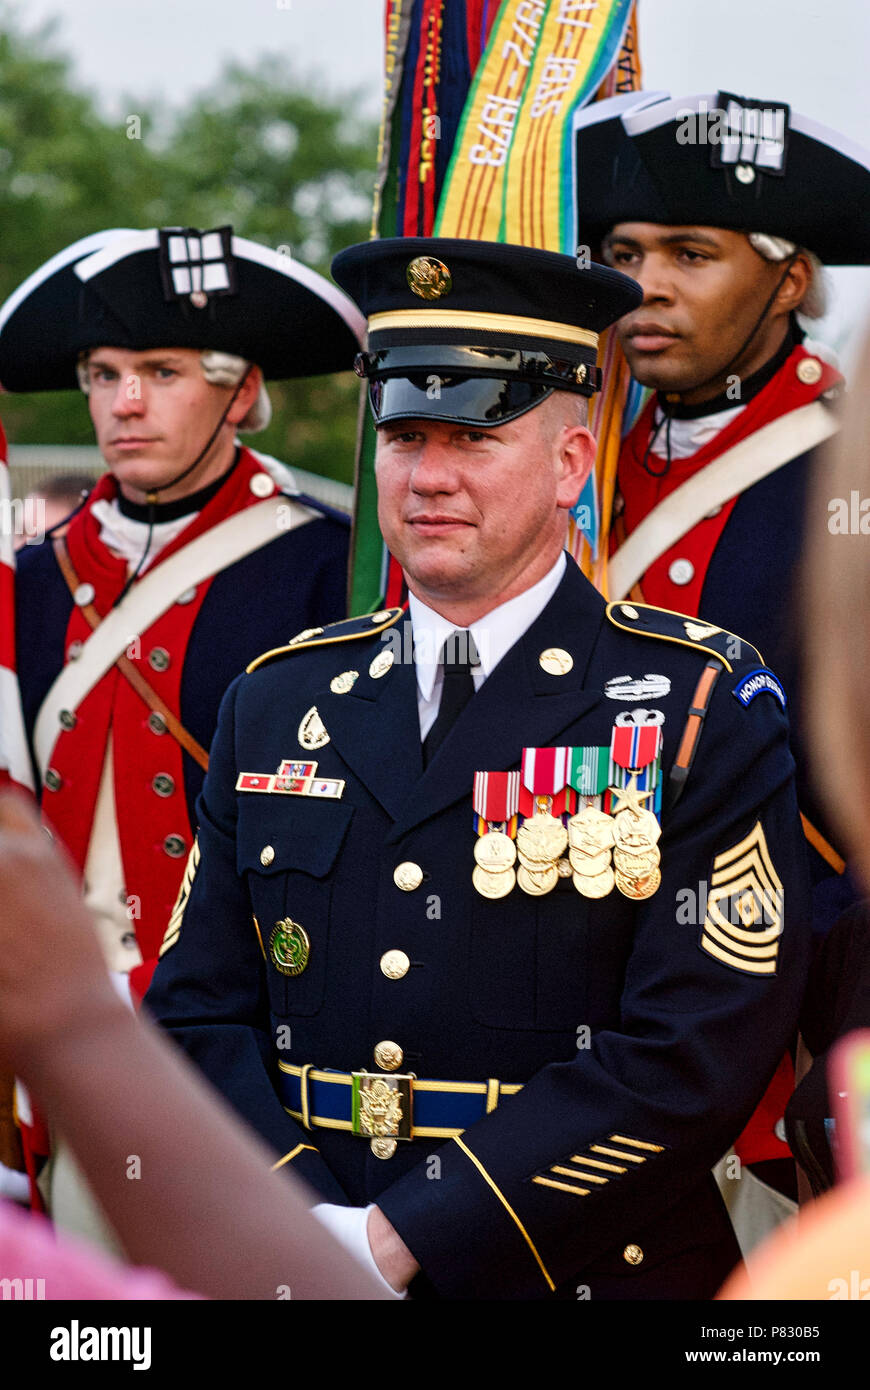 Fort Myer, Virginia - June 13, 2018: A First Sergeant of the Old Guard poses for photos in front of member of the U.S. Army Continental Color Guard. Stock Photo